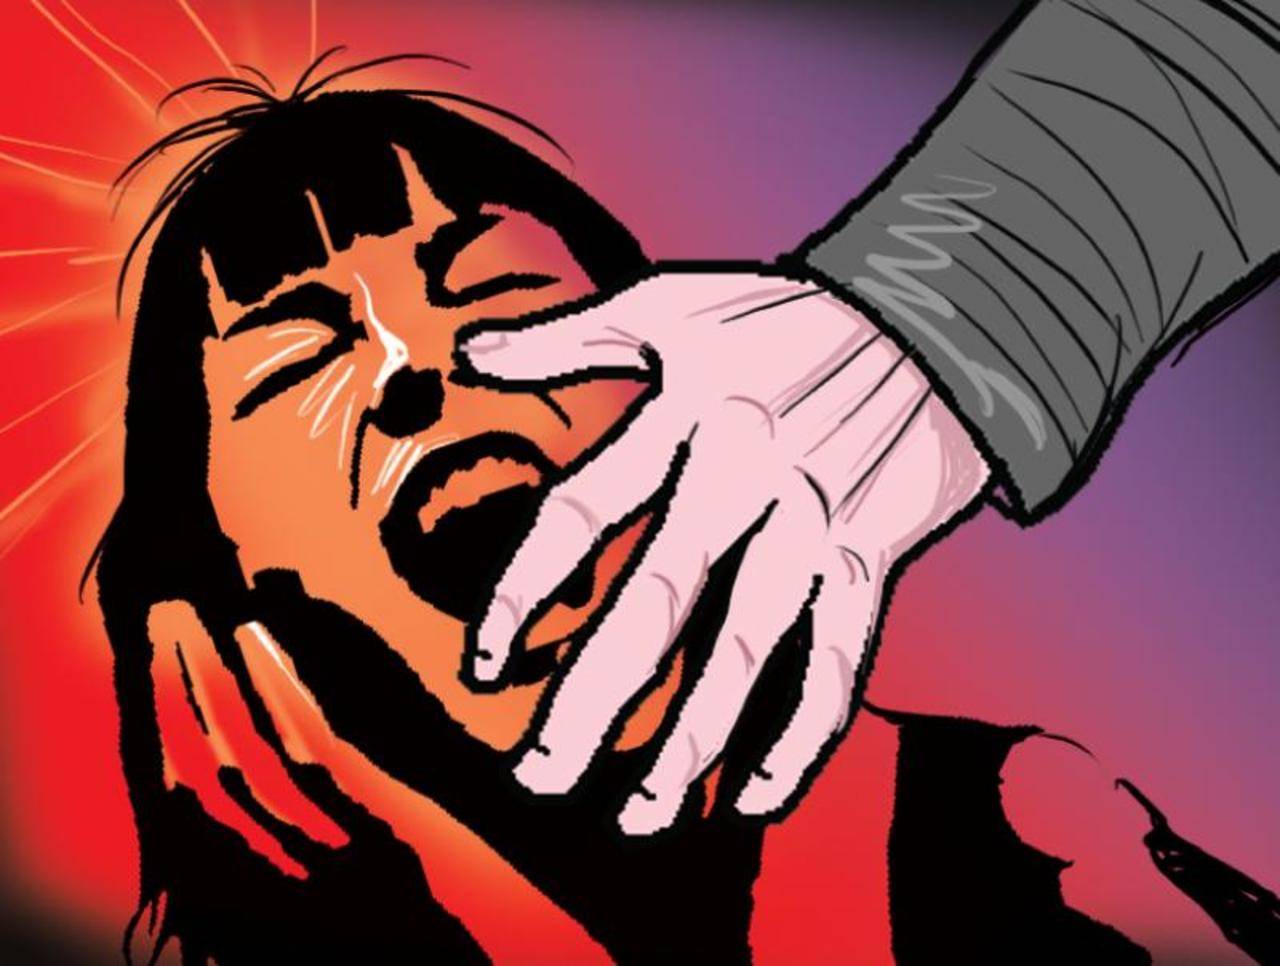 Doc booked for forcing wife to have unnatural sex Nagpur News photo